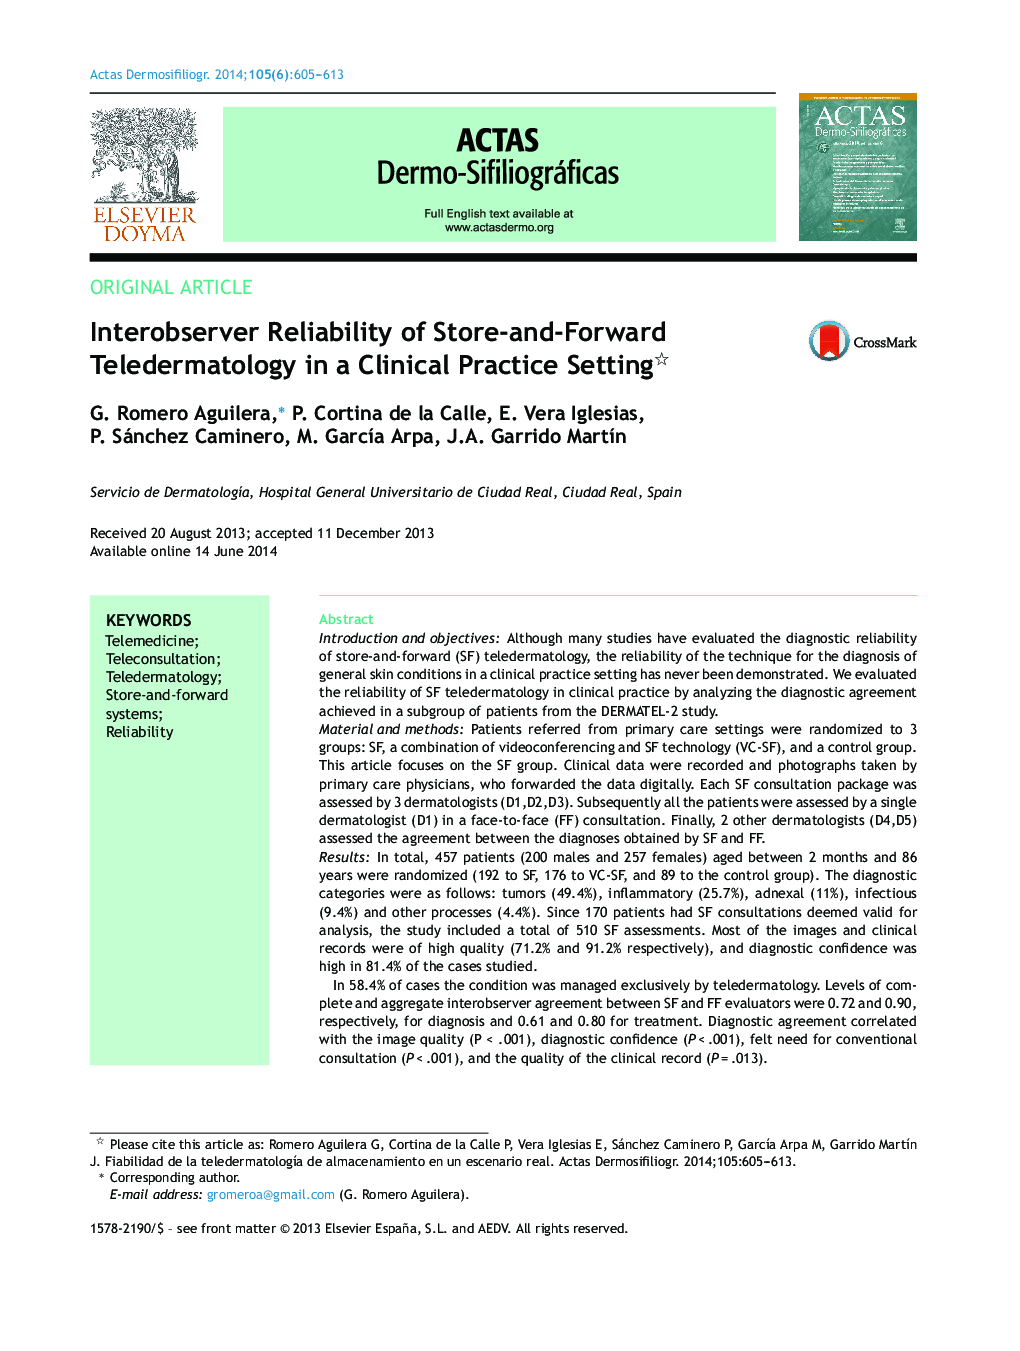 Interobserver Reliability of Store-and-Forward Teledermatology in a Clinical Practice Setting 